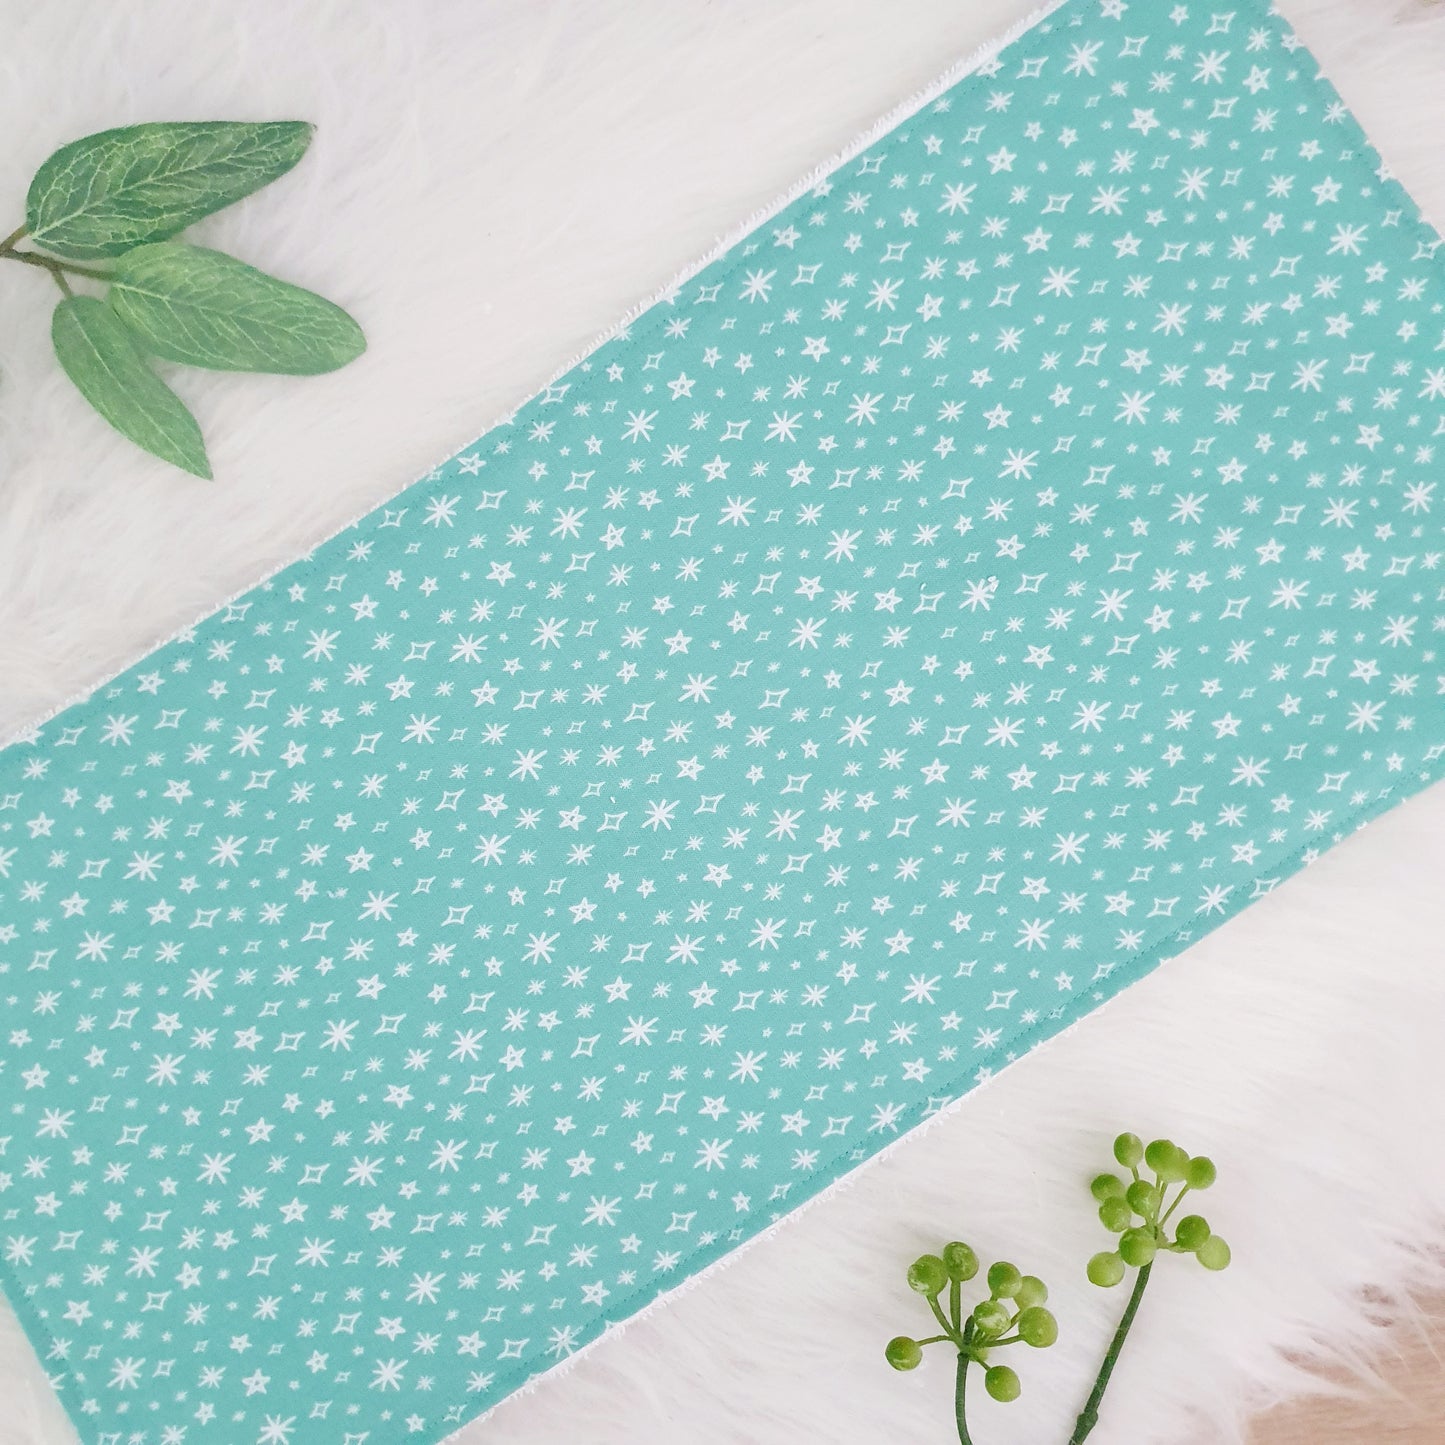 GREEN TWINKLE Burp Cloth | Baby Burp Cloths | Baby Shower Gift | Bamboo Backed Ultra Absorbent Towelling